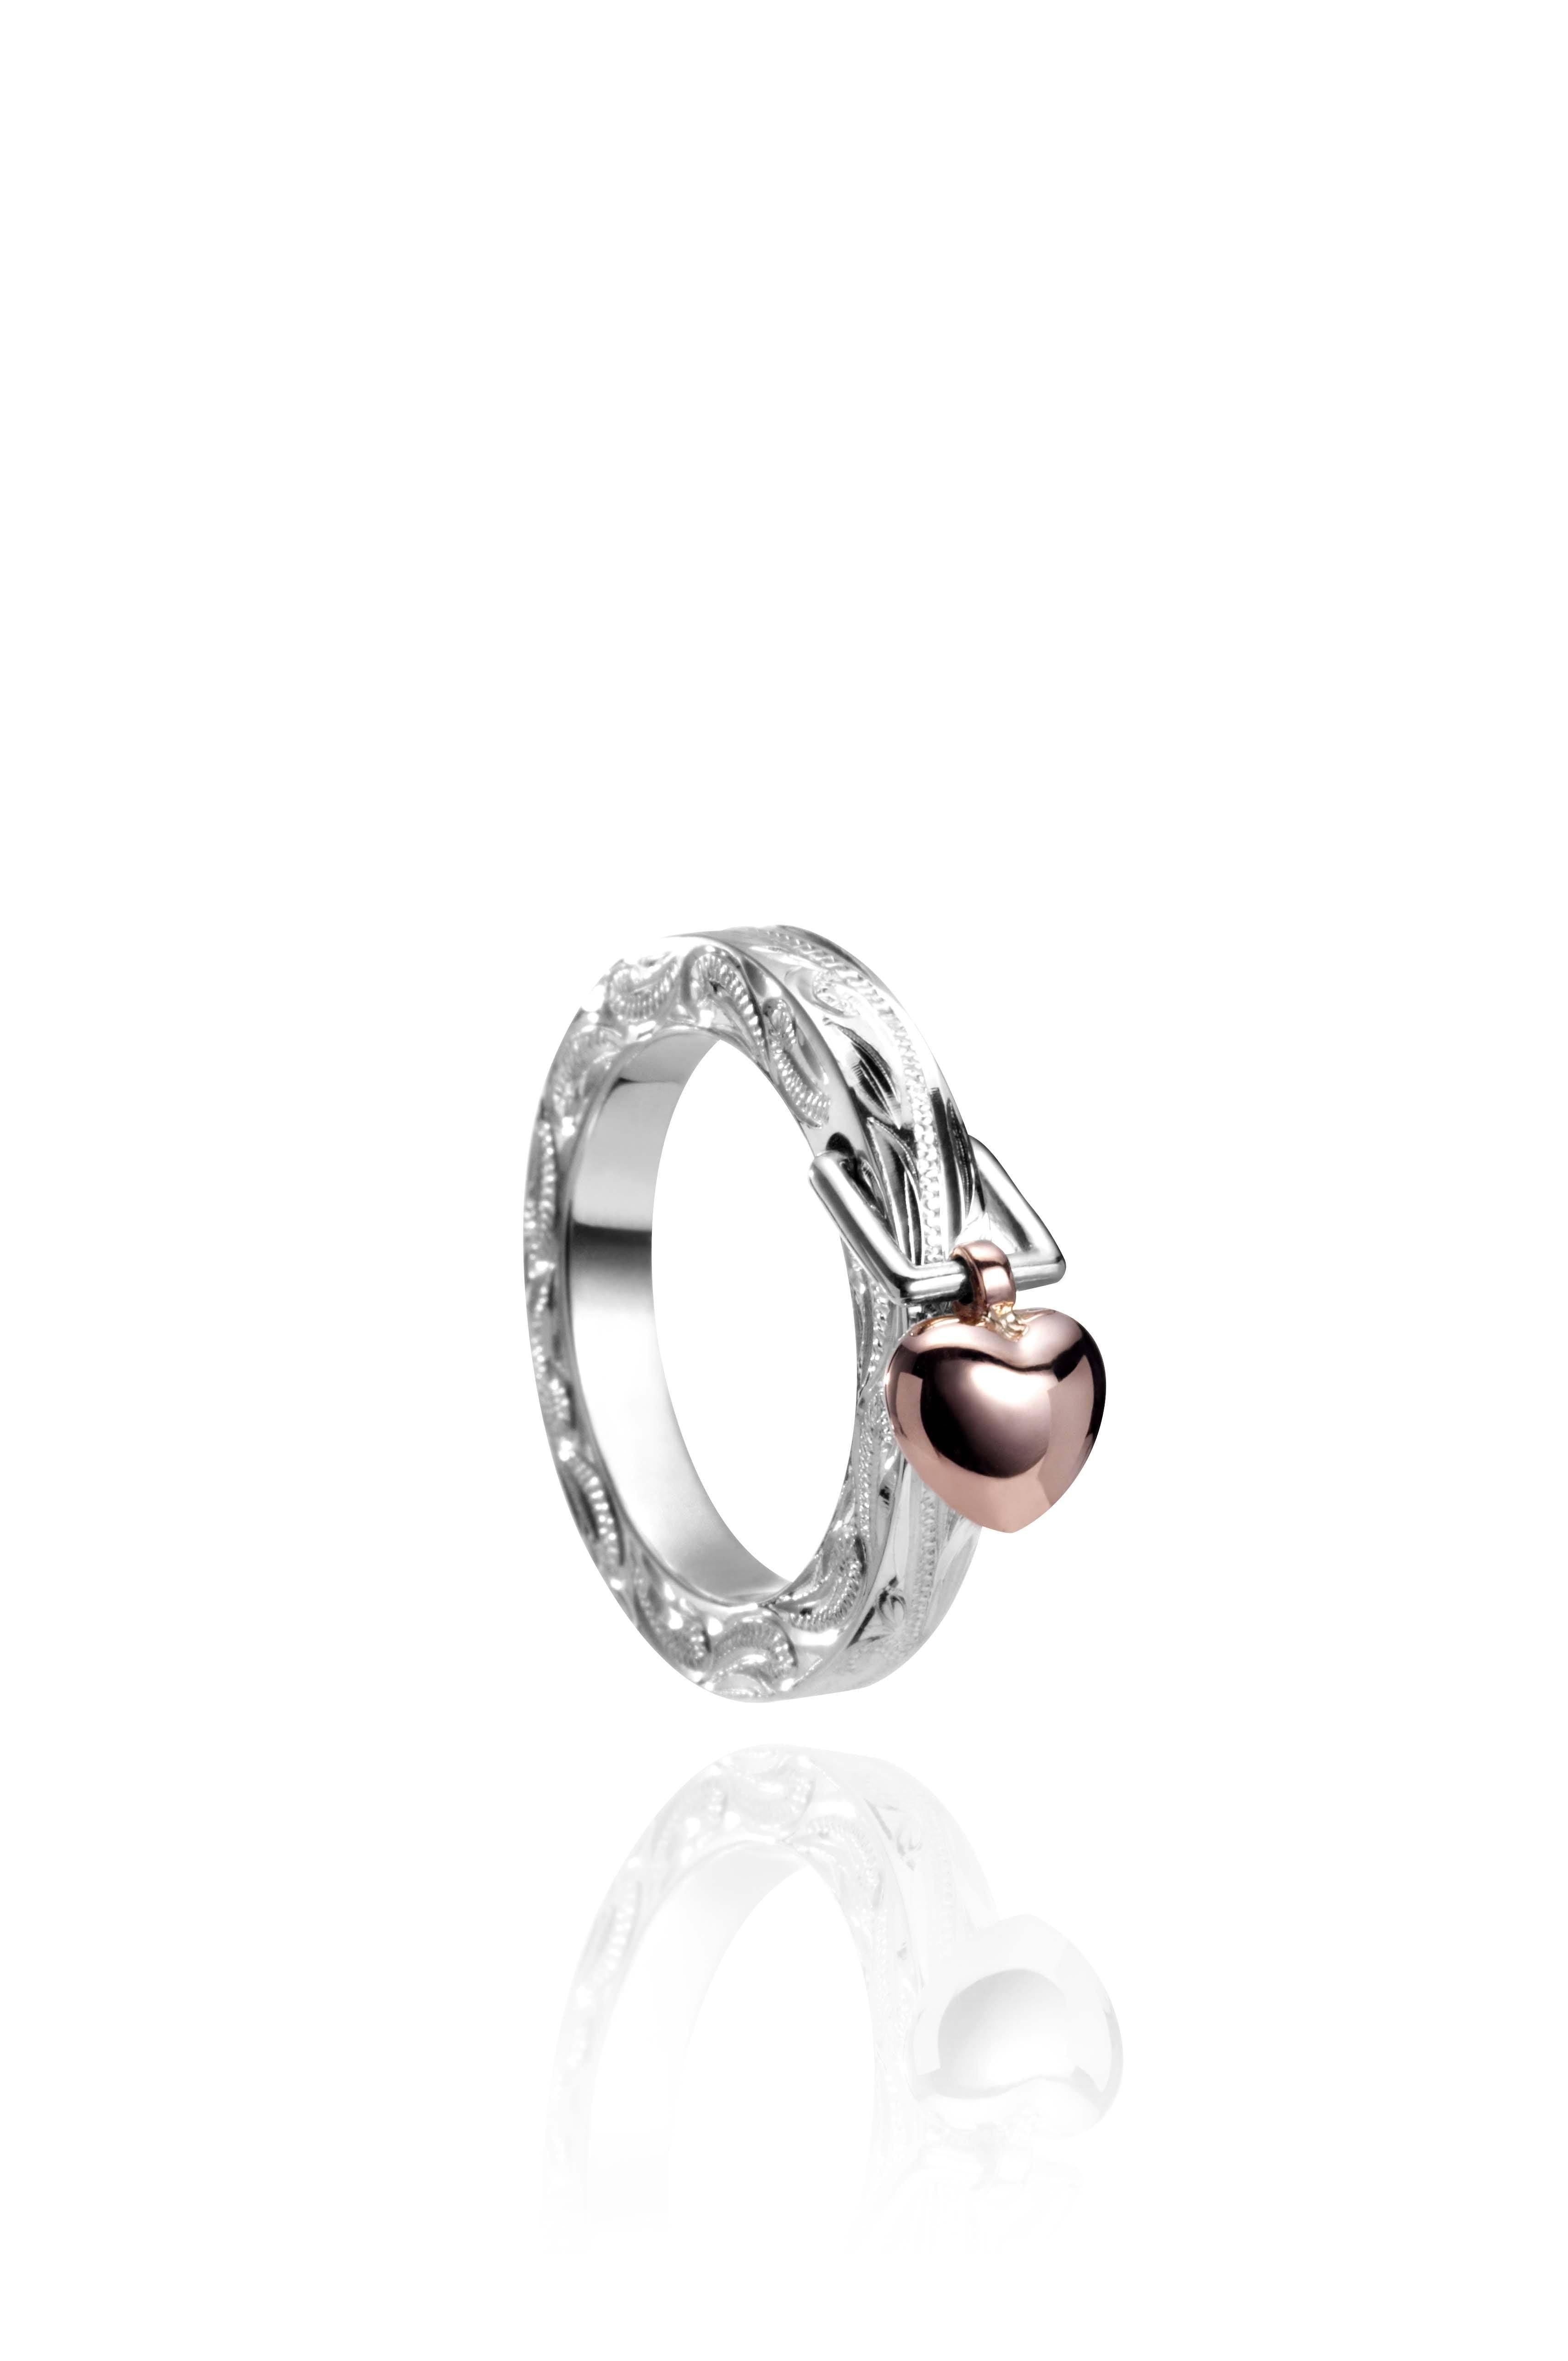 The picture shows a 14K rose gold and 925 sterling silver heart ring with hand engravings.